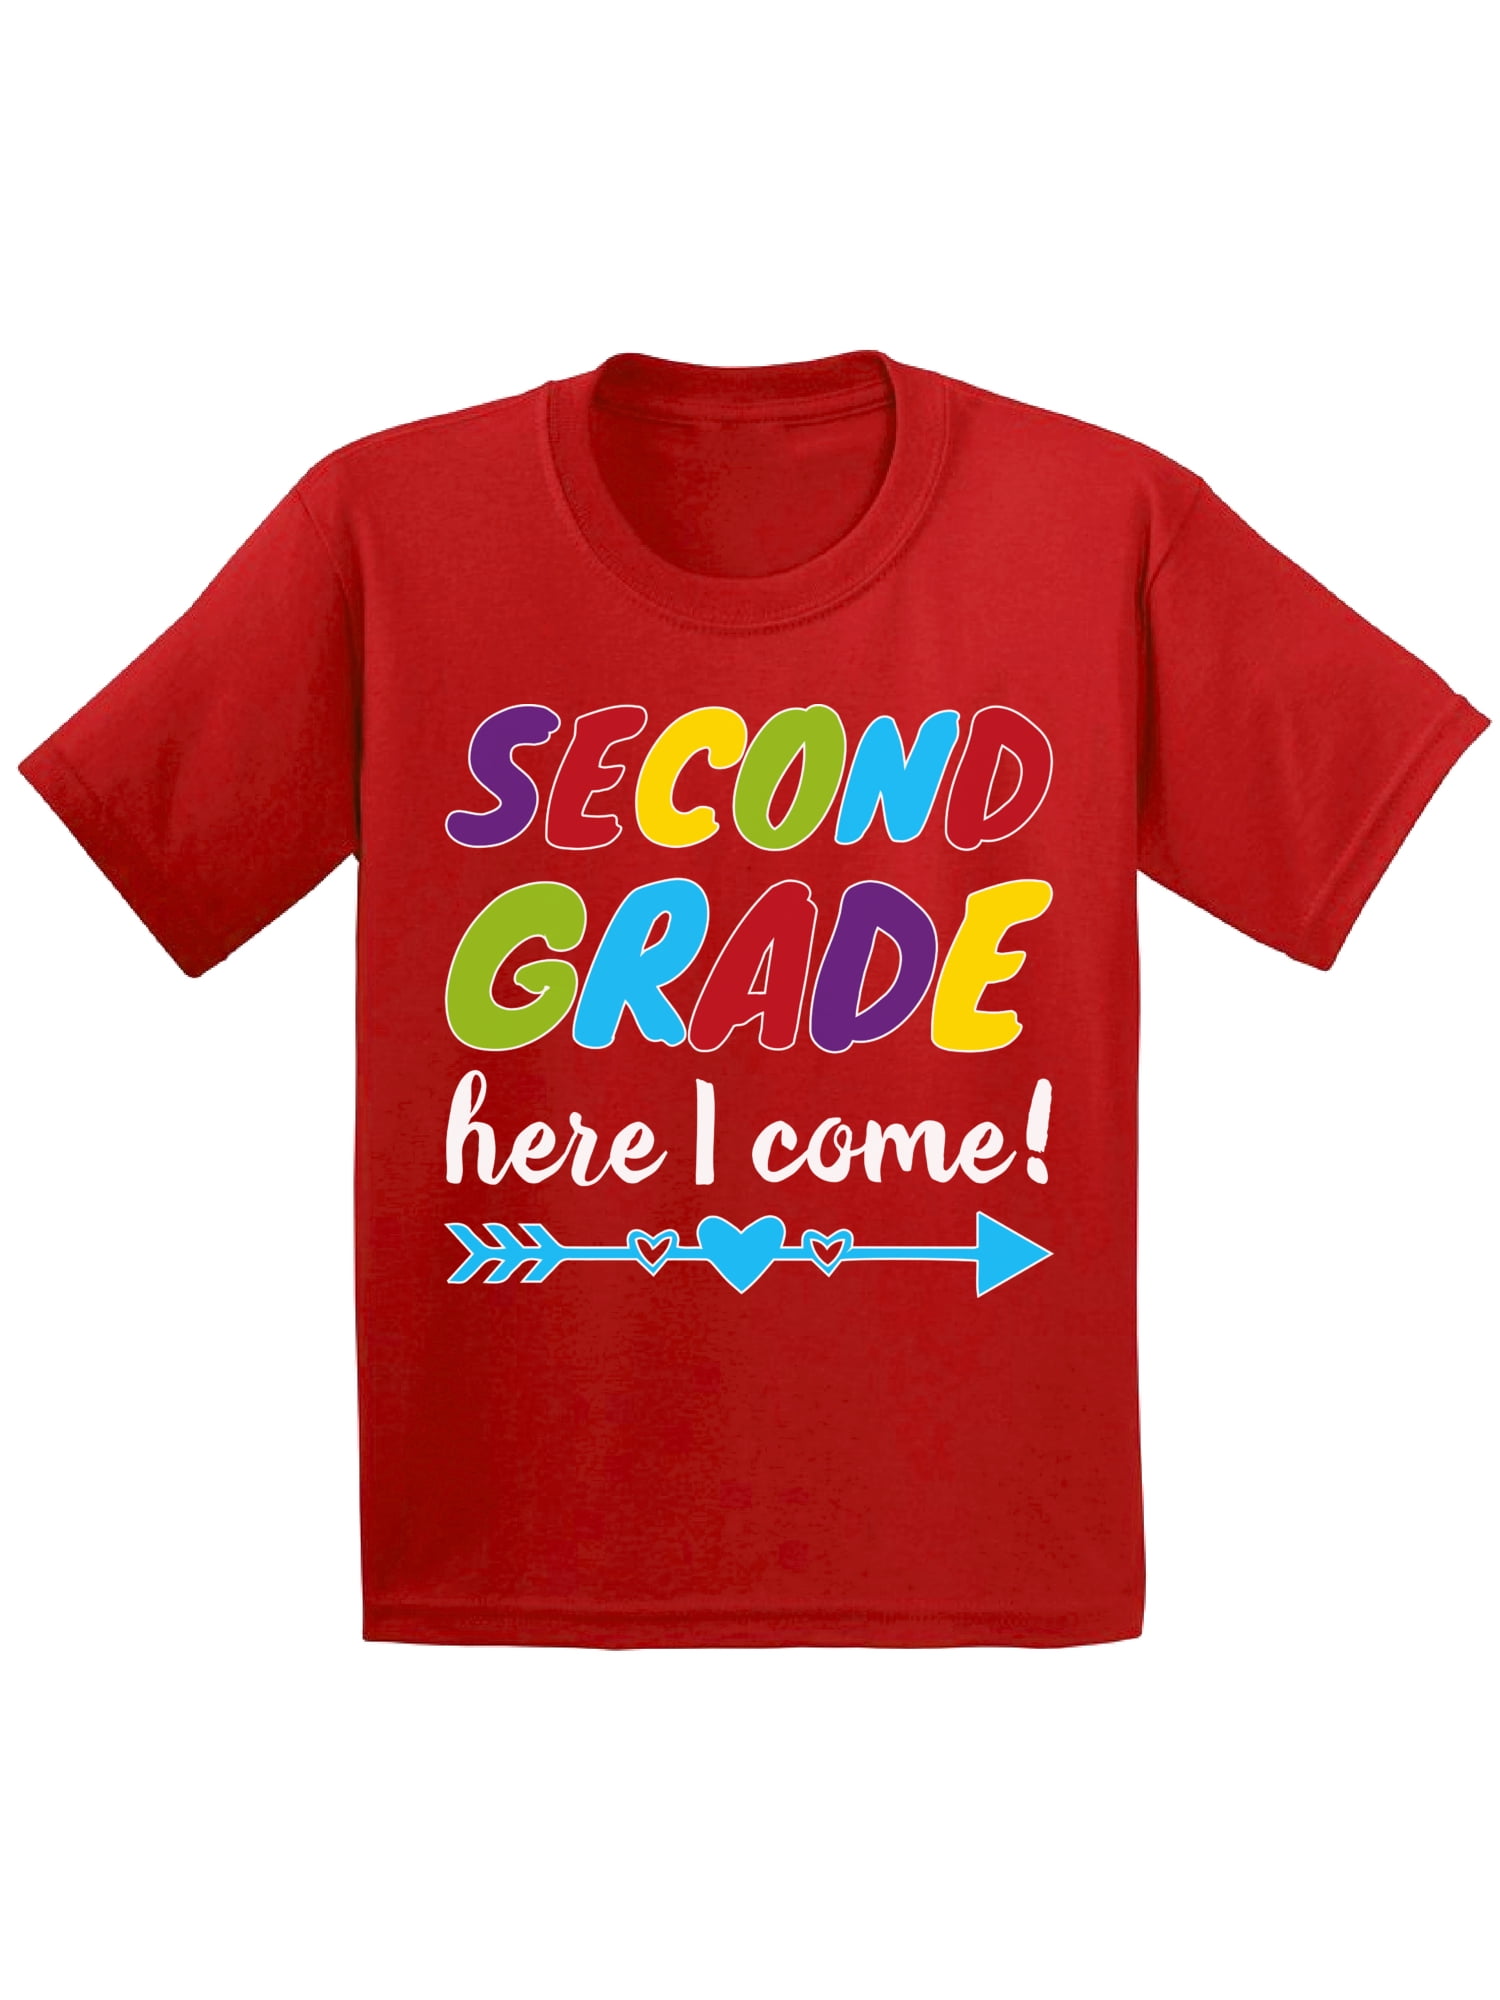 Back to School Shirts for 2nd Grader Shirt Kids First Day of School Second Grade Shirt for Boys Fun Girls Shirts 8 9 Years Old T Shirts for School